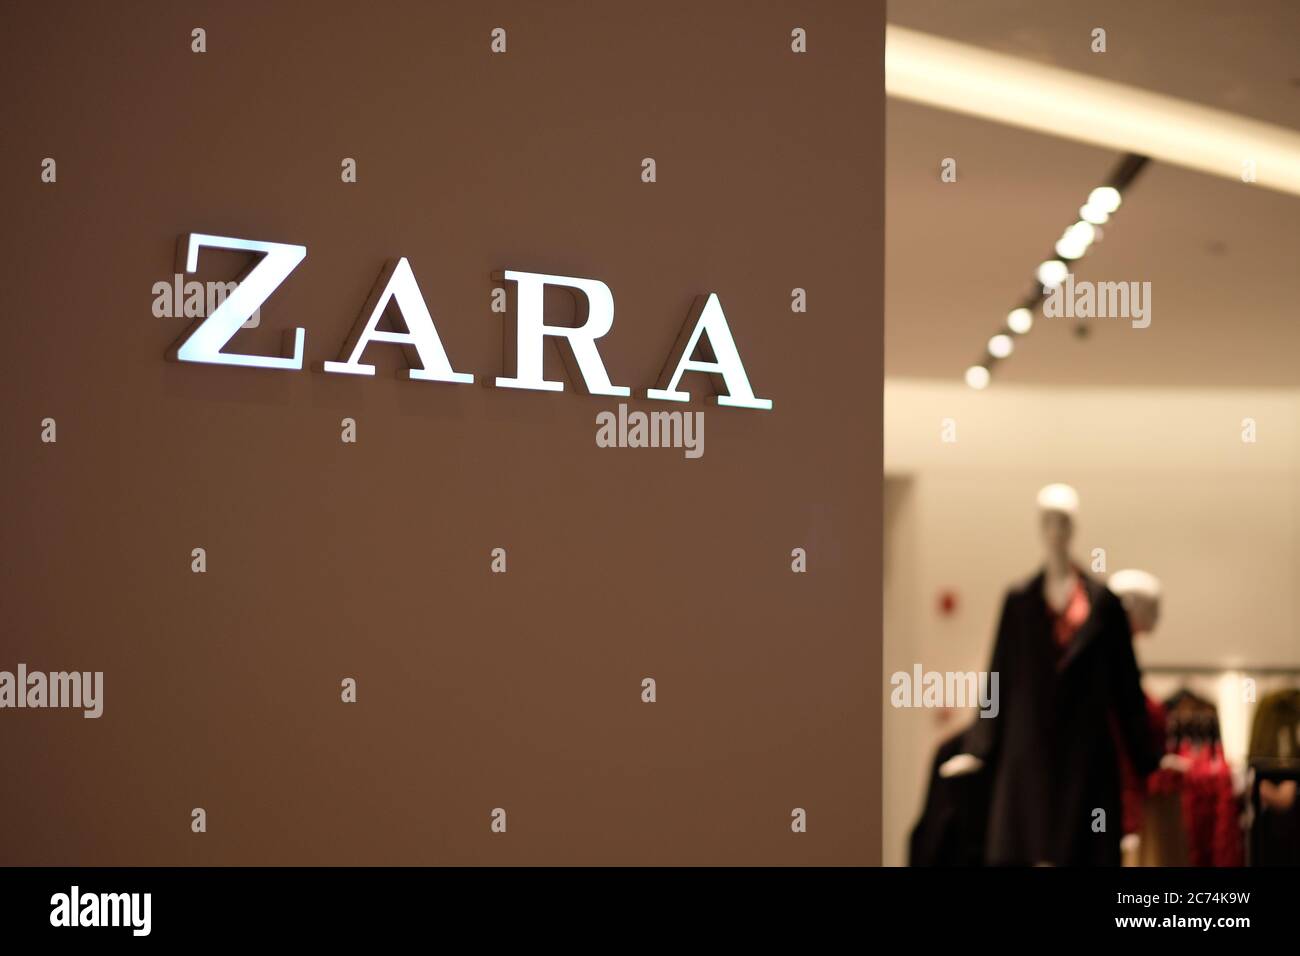 Zara Brand Clothing Made in China, with View of Fabric Texture and ...